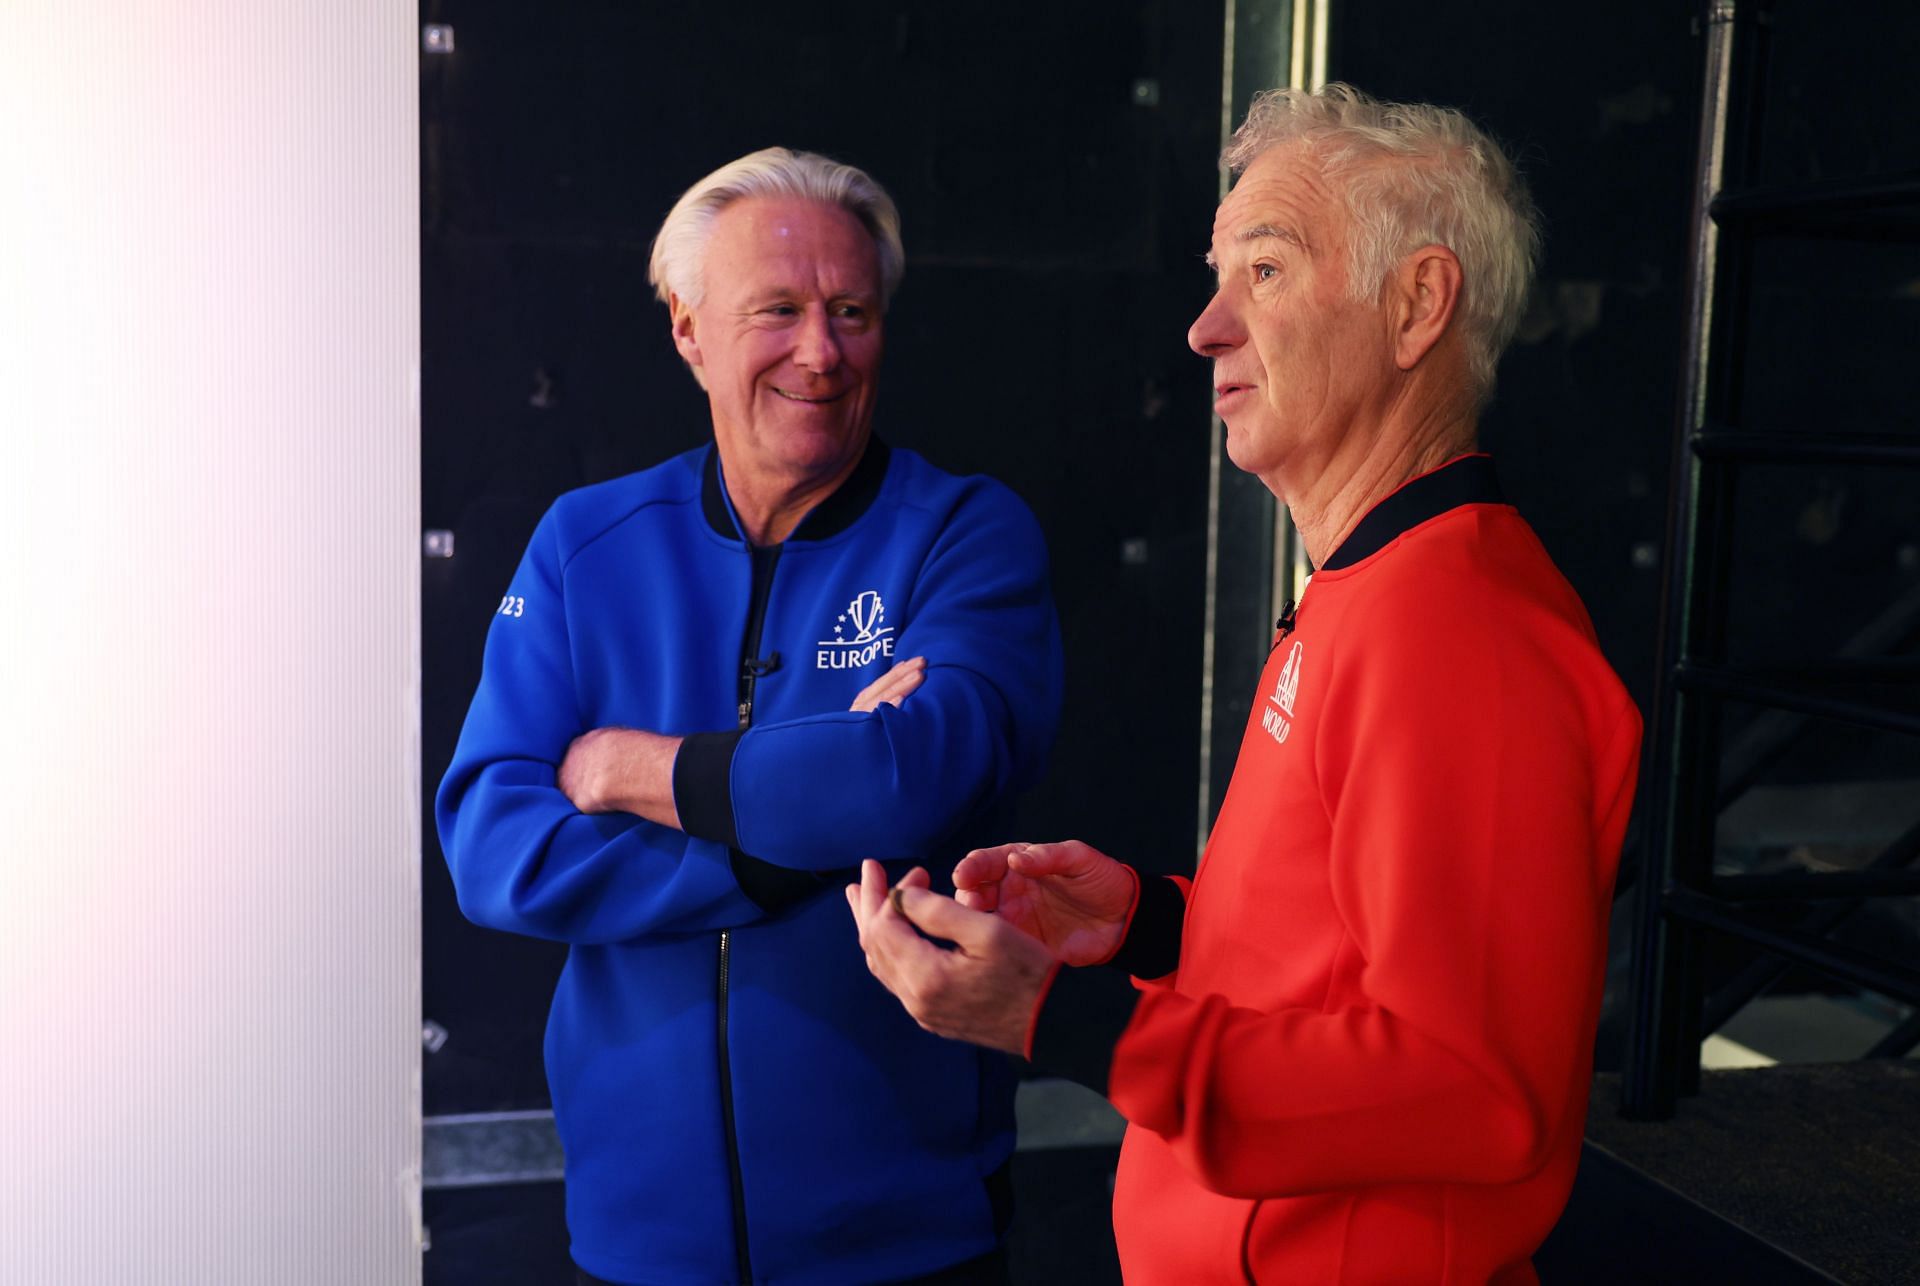 Bjorn Borg (L) and John McEnroe pictured at Laver Cup